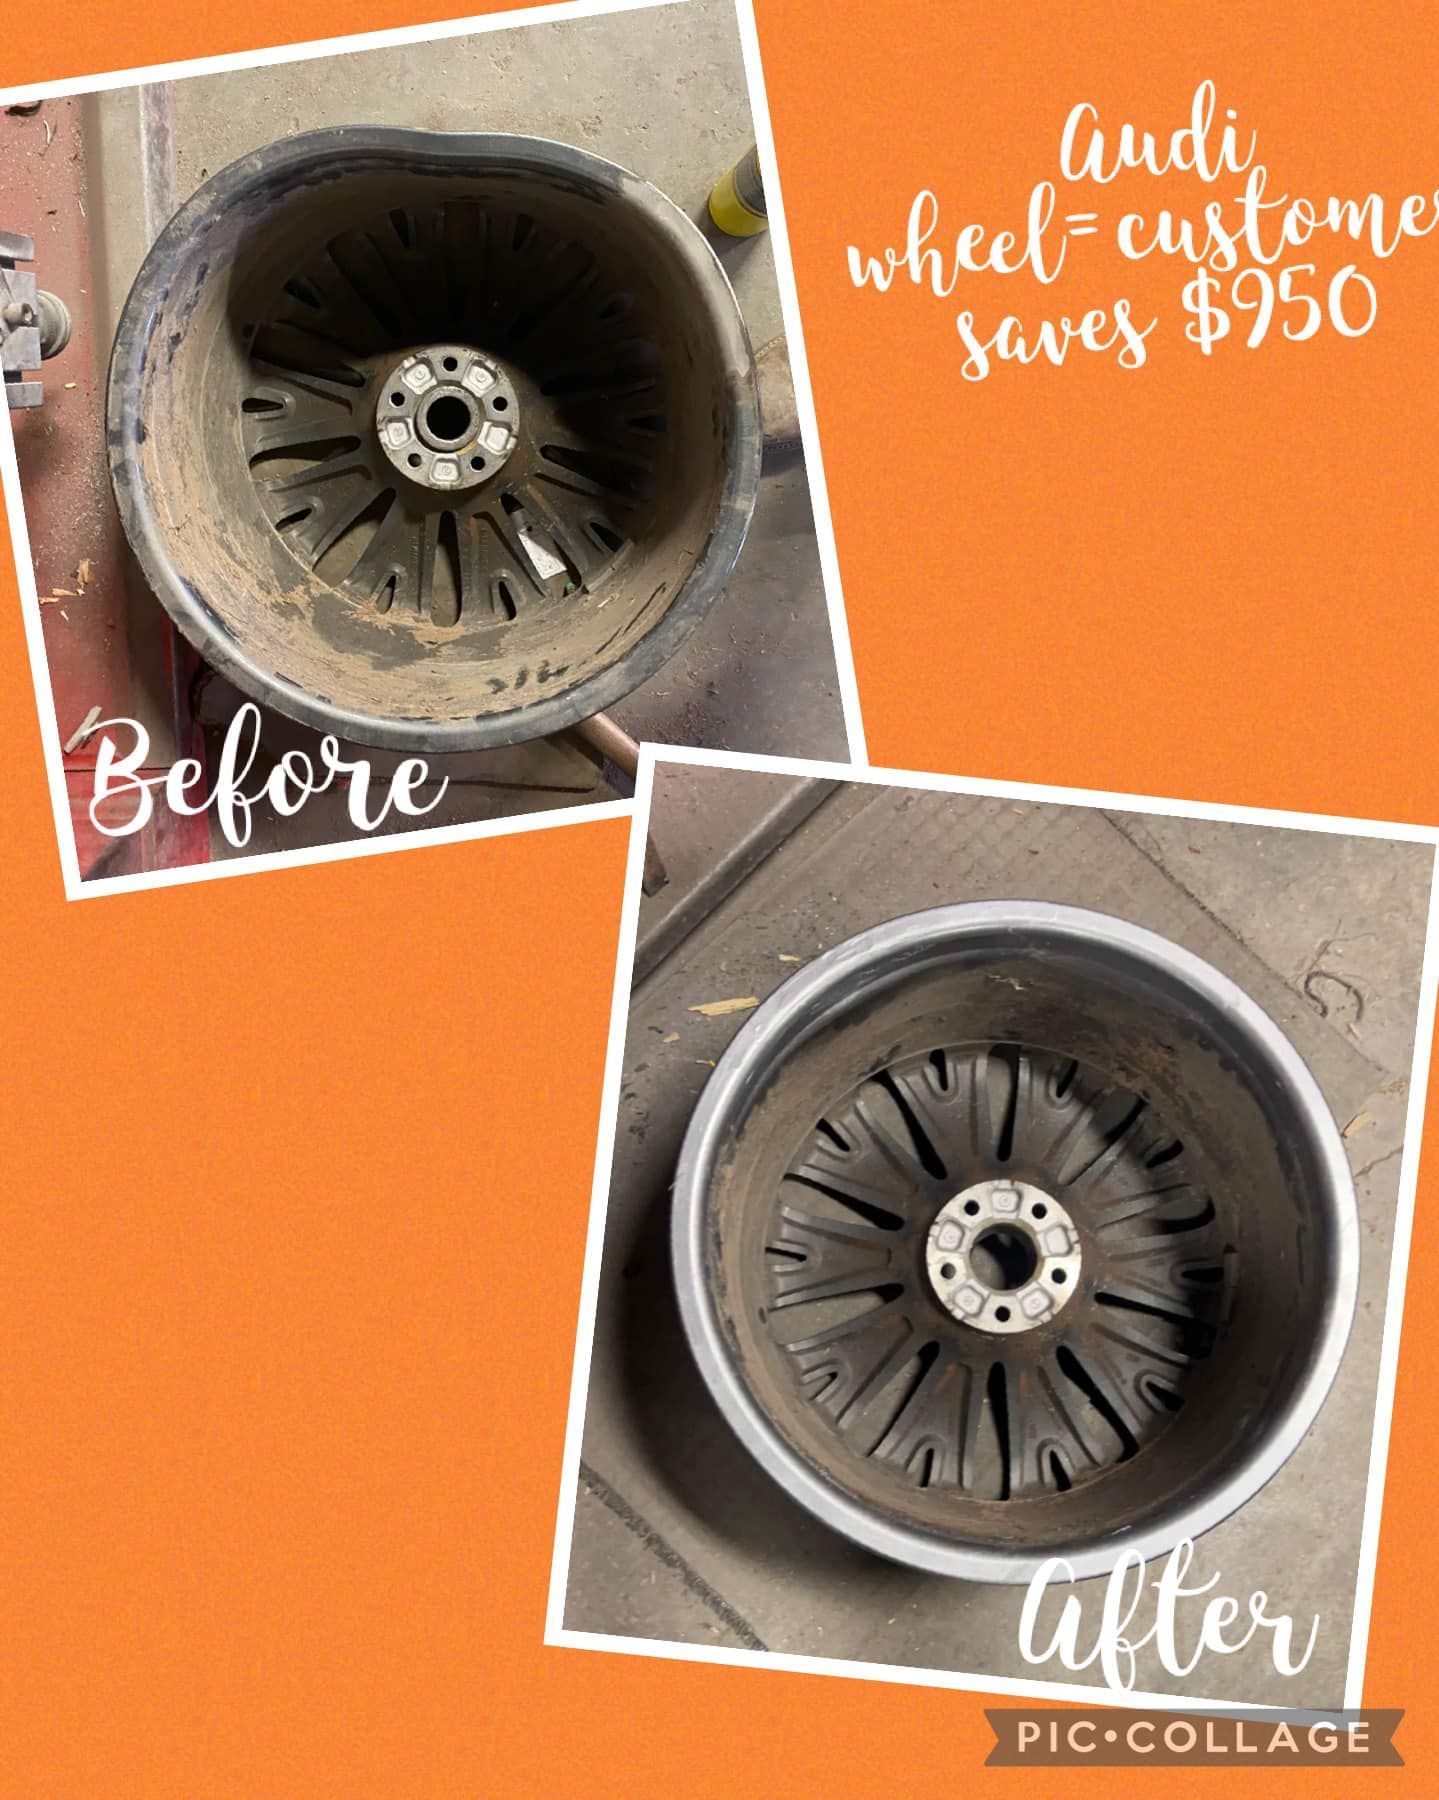 Before and After Bent Wheel Brandon Cavender